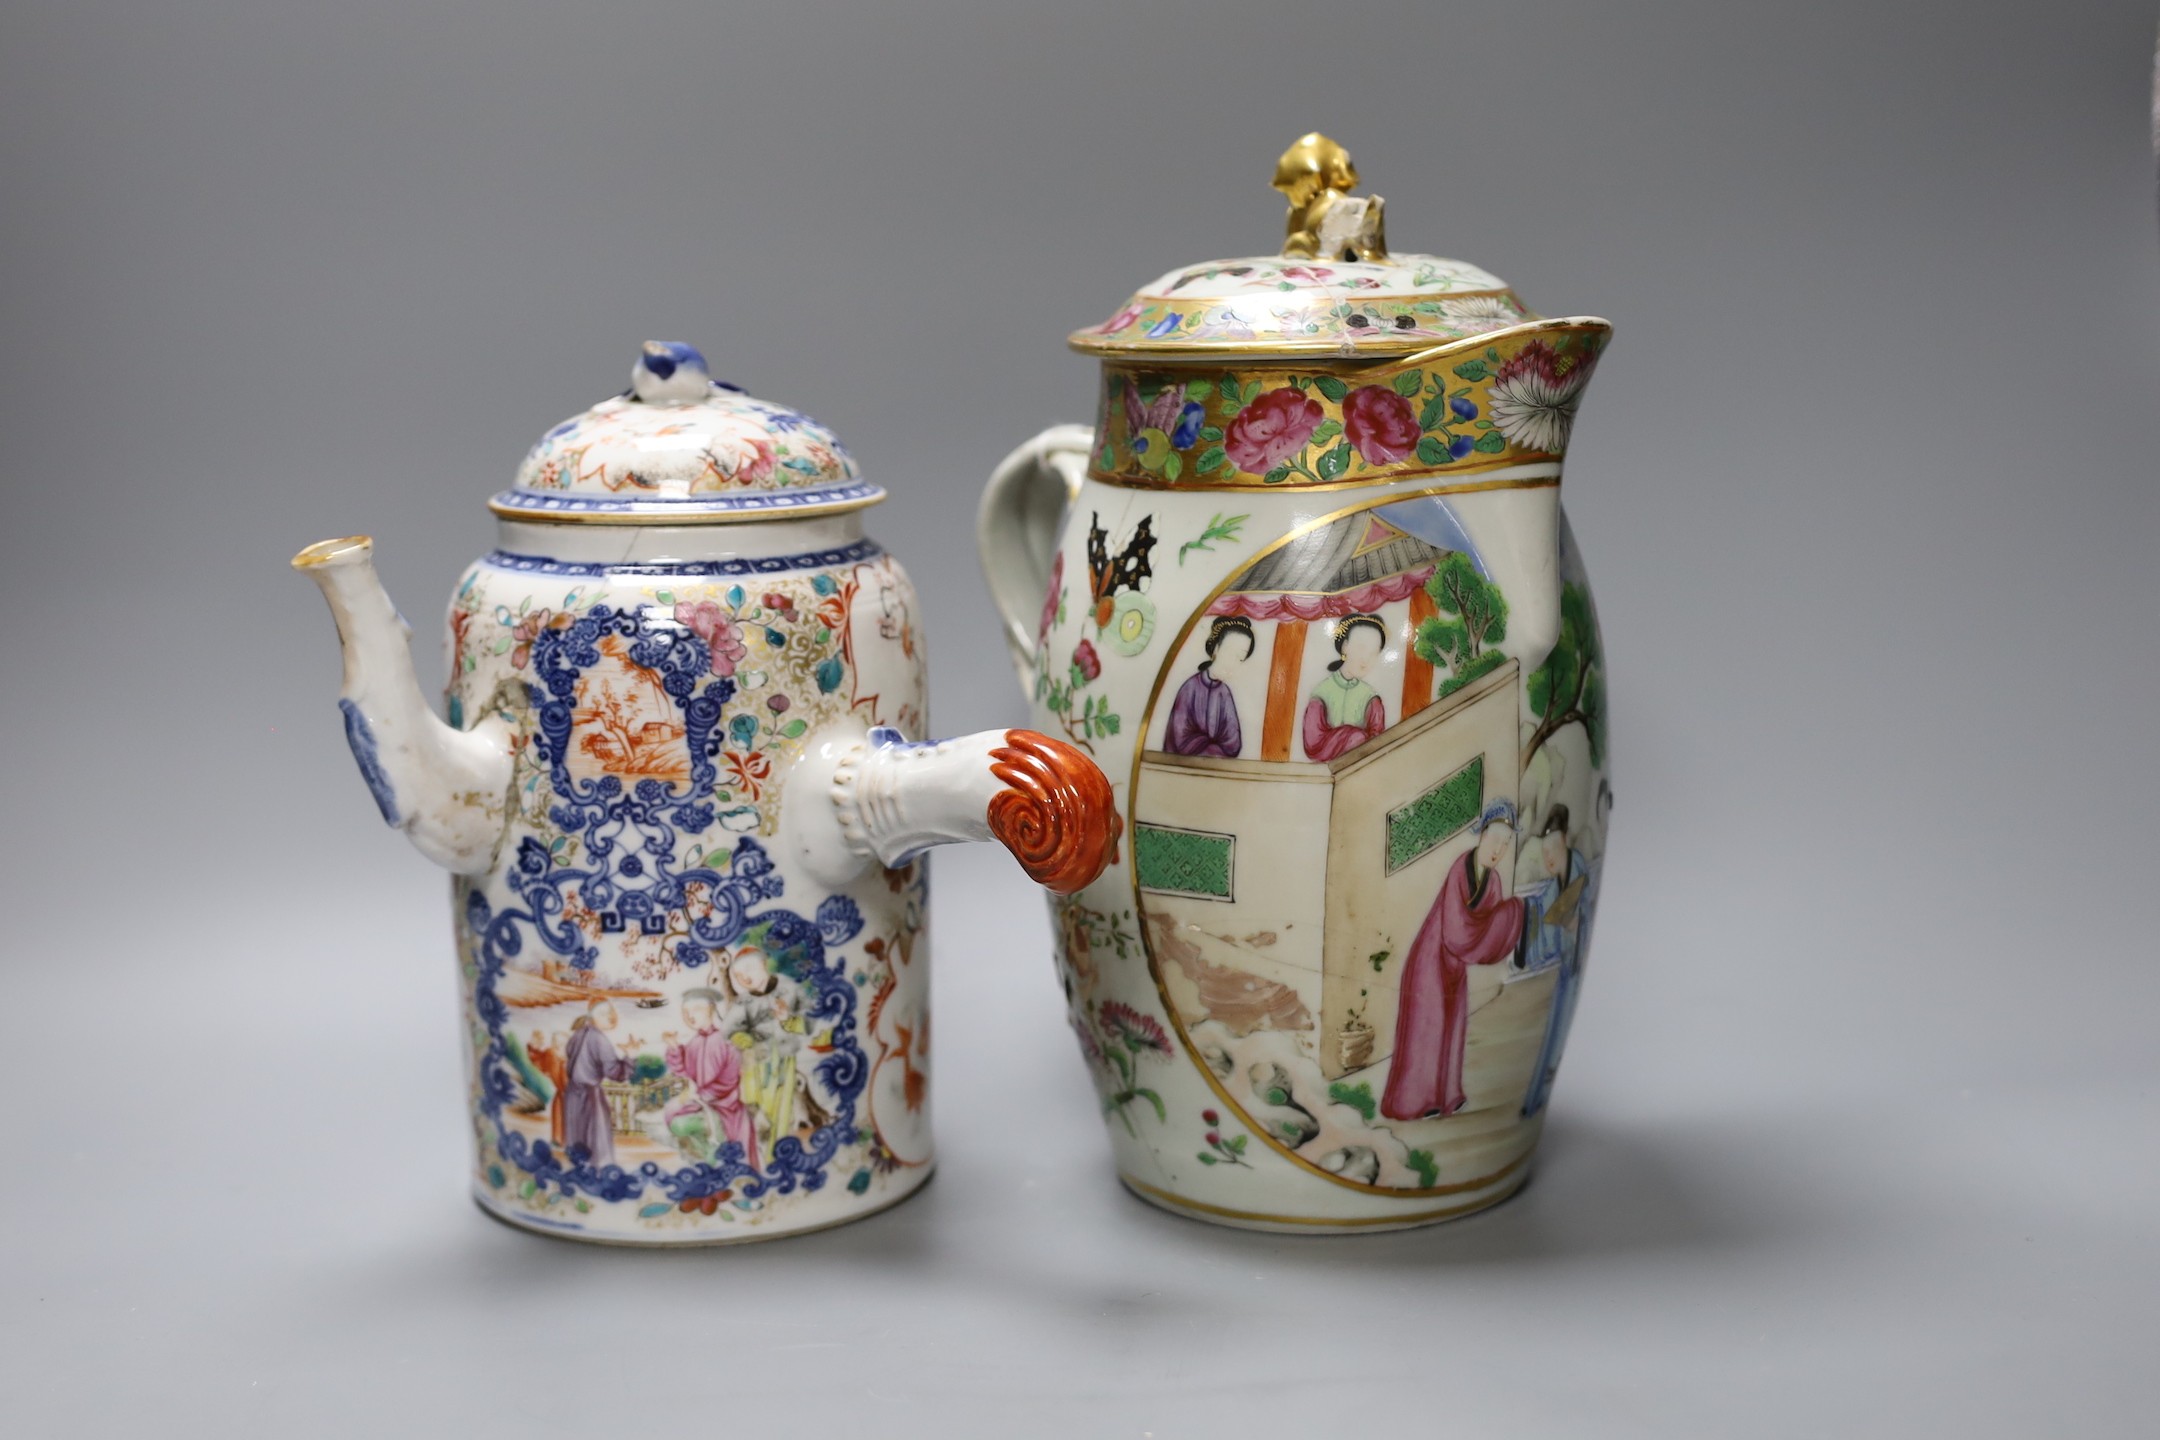 An 18th century Chinese export chocolate pot and cover, together with a Cantonese lidded jug, 26cm tall